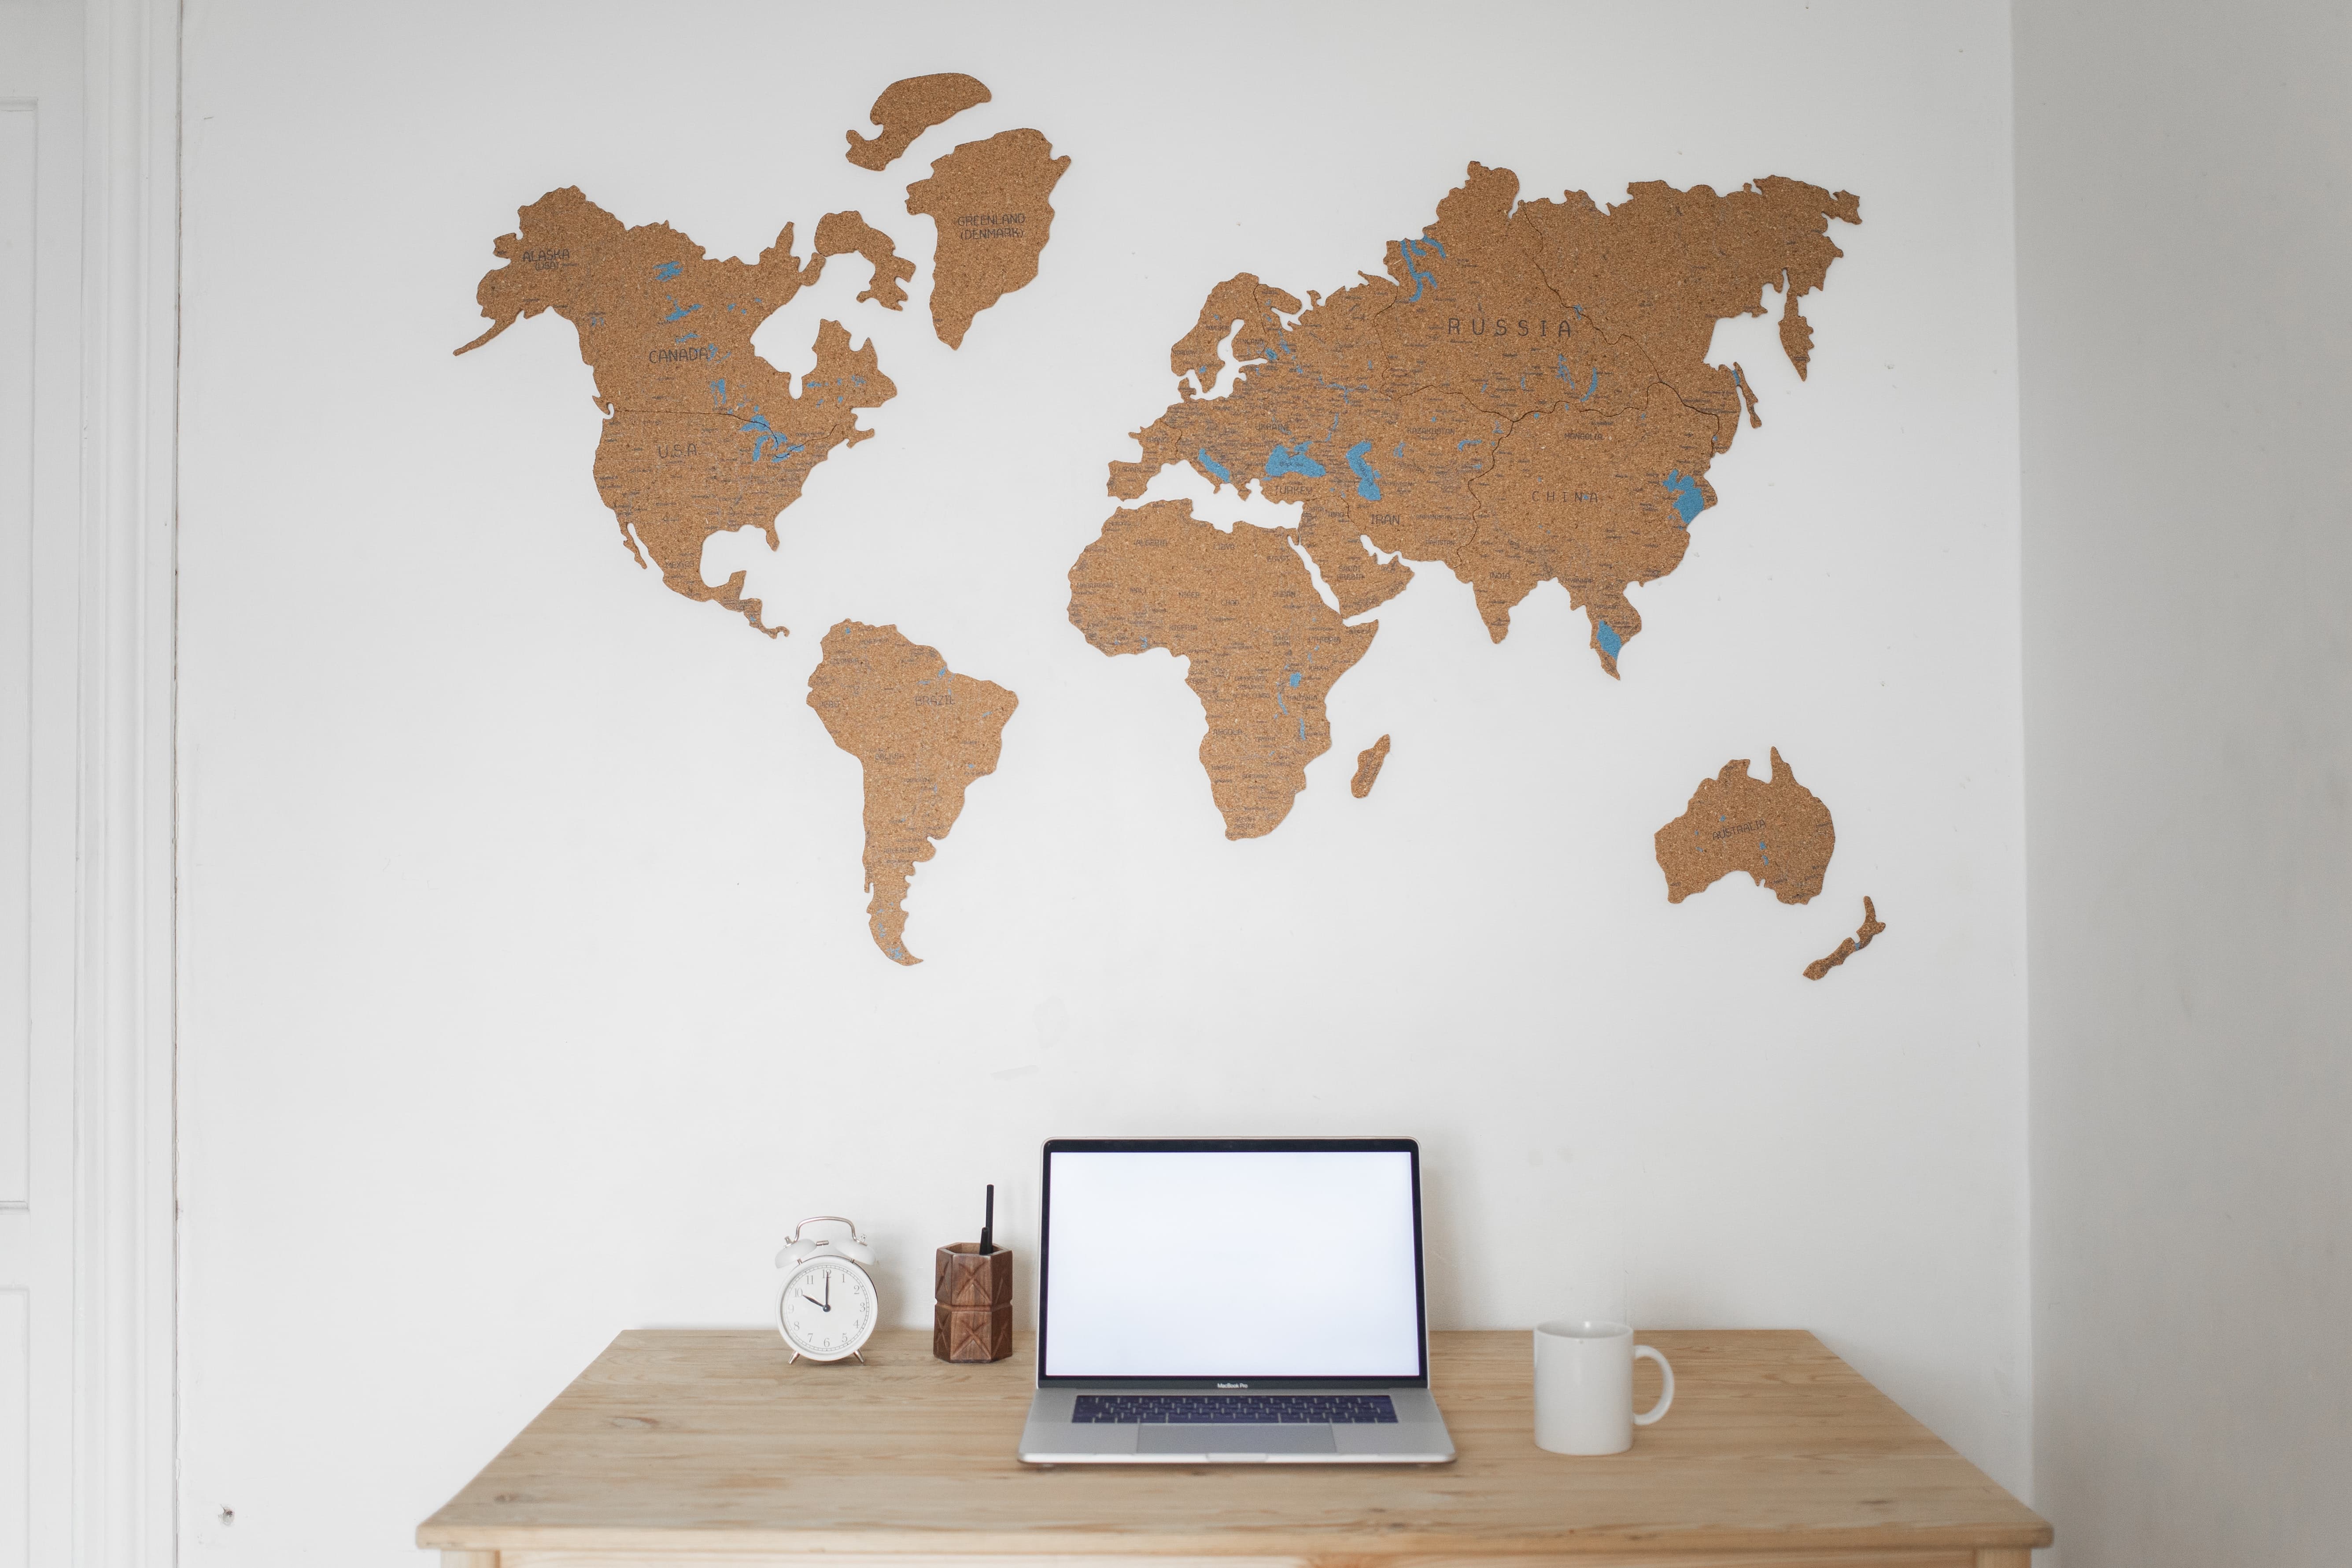 Terms and Conditions header image showing a map of the continents, mounted on the wall. 